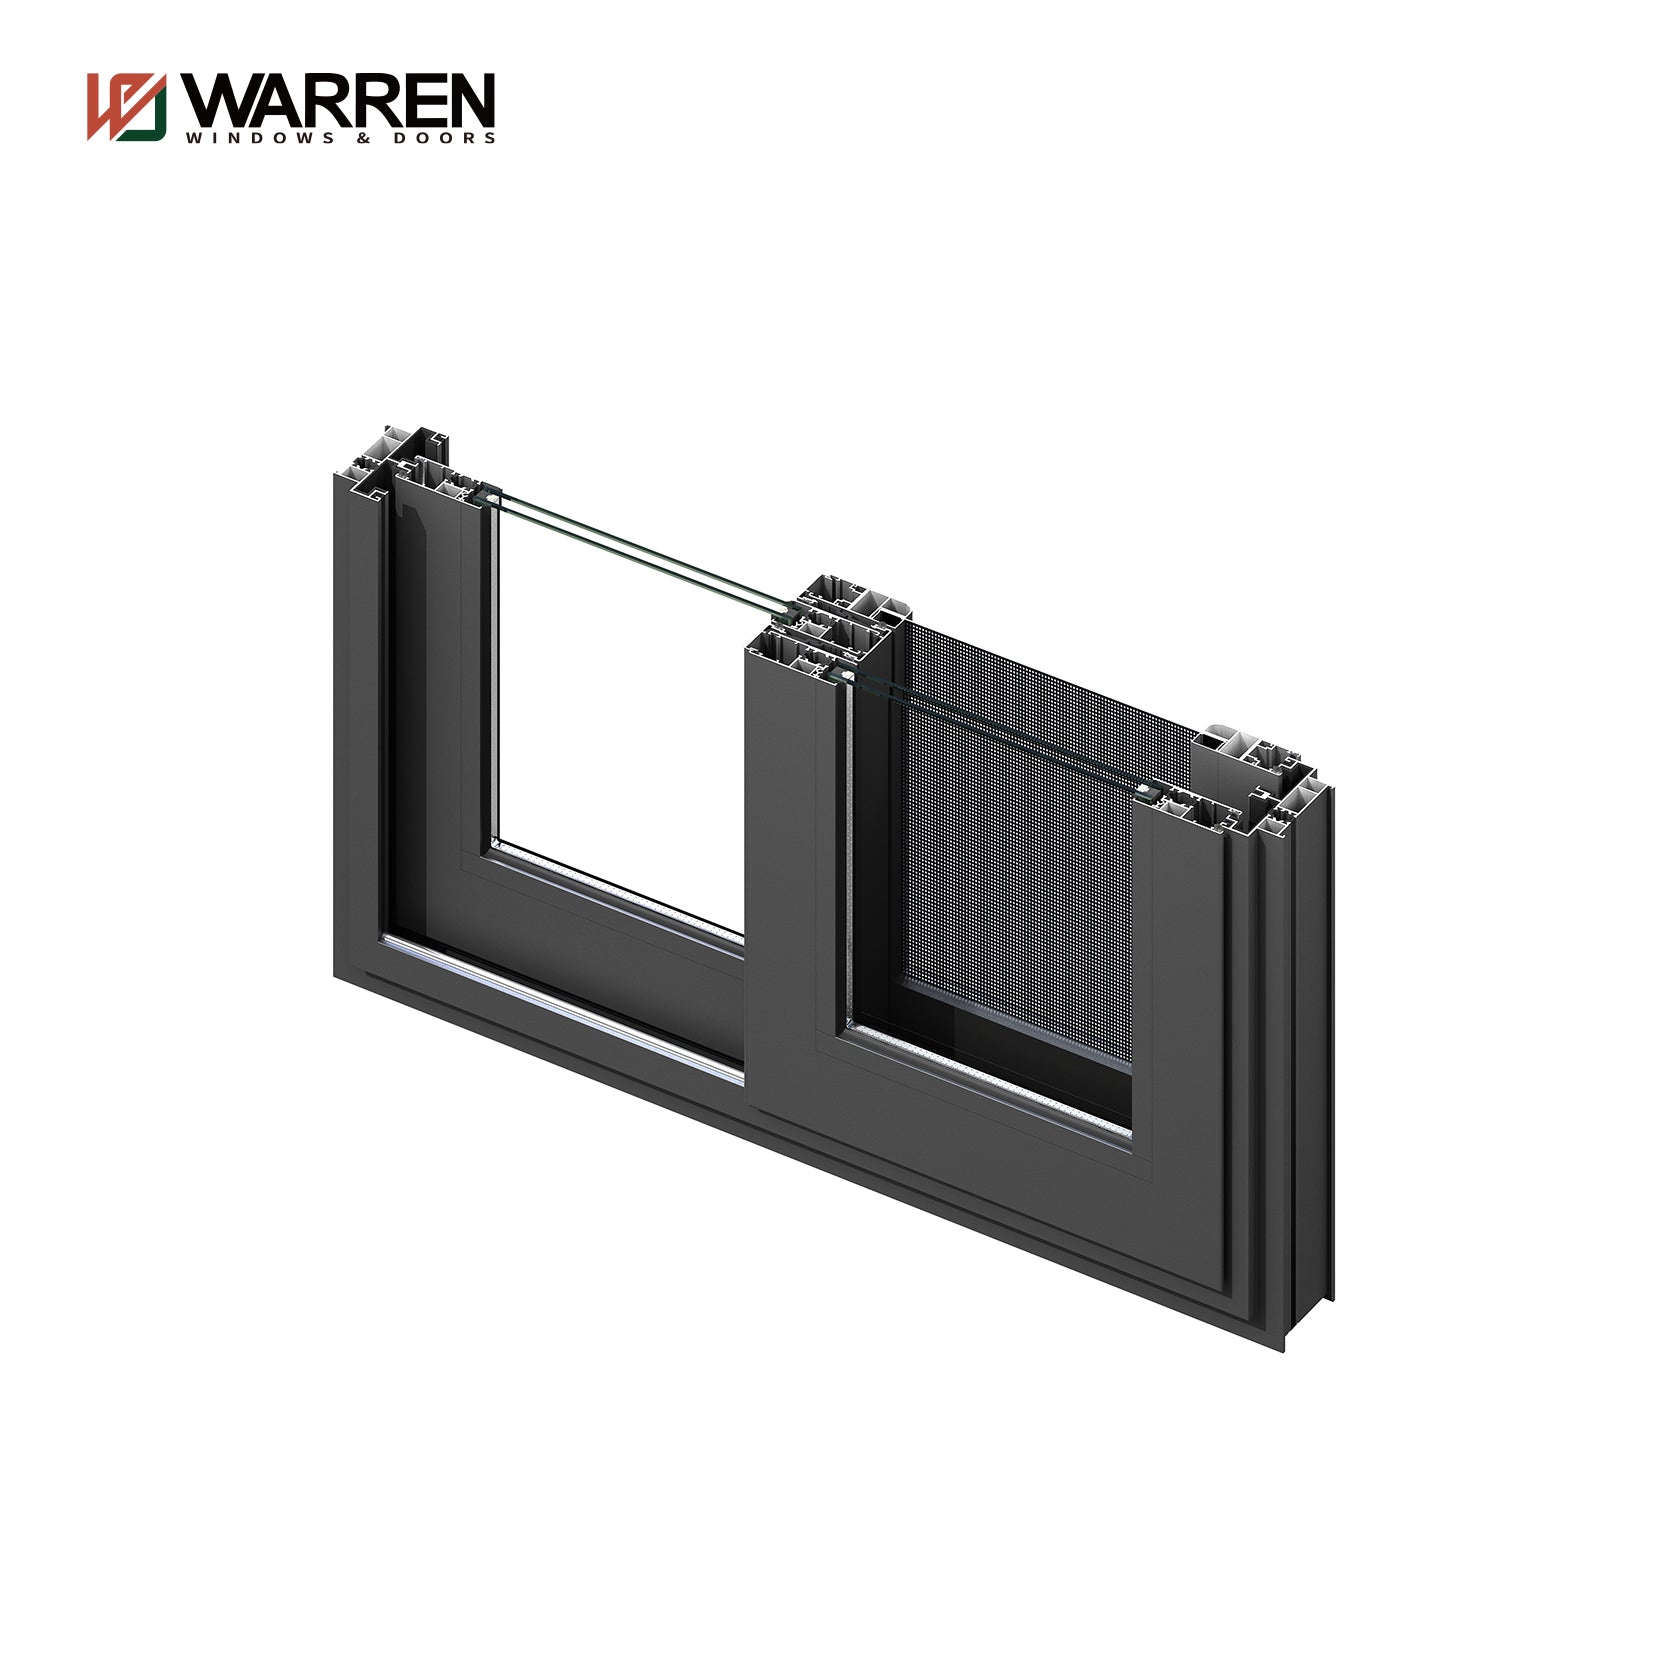 Factory Directly Sell Windows Manufacturer Aluminum Sliding Window Frame For Various Rooms